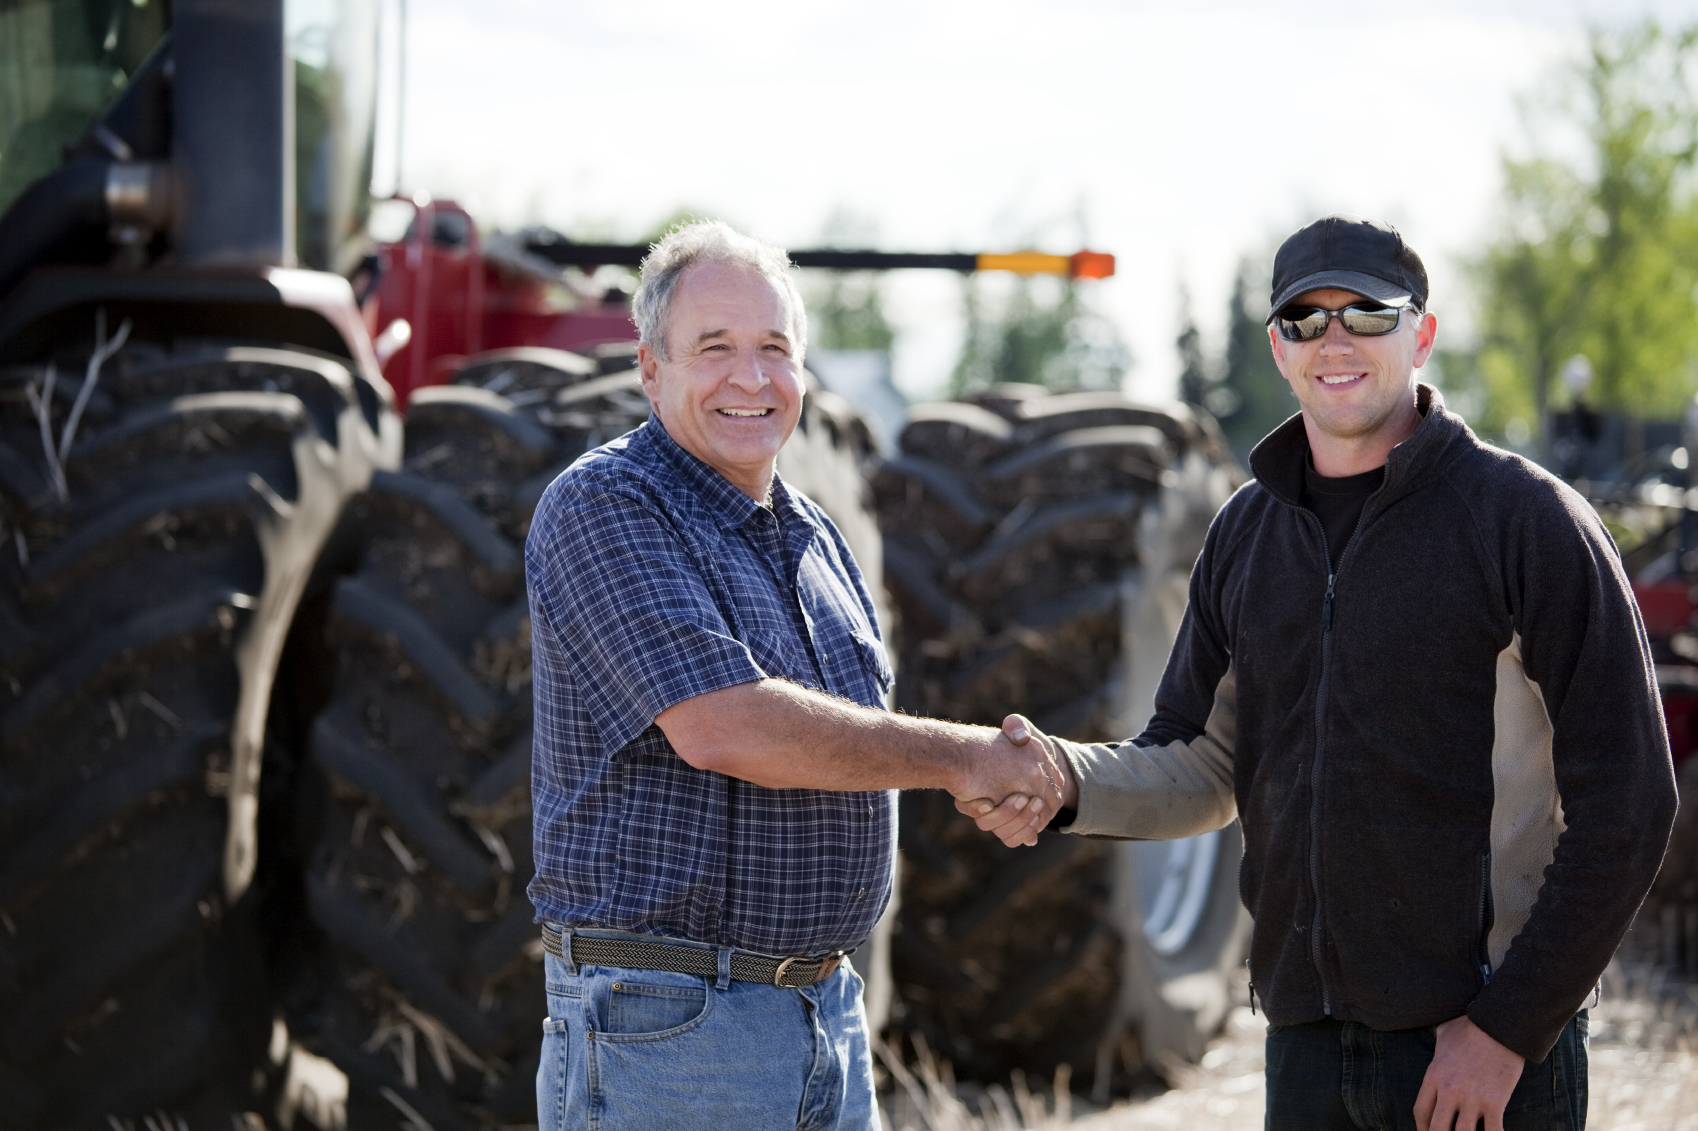 Older man shakes hands with younger man. Tractor in background.